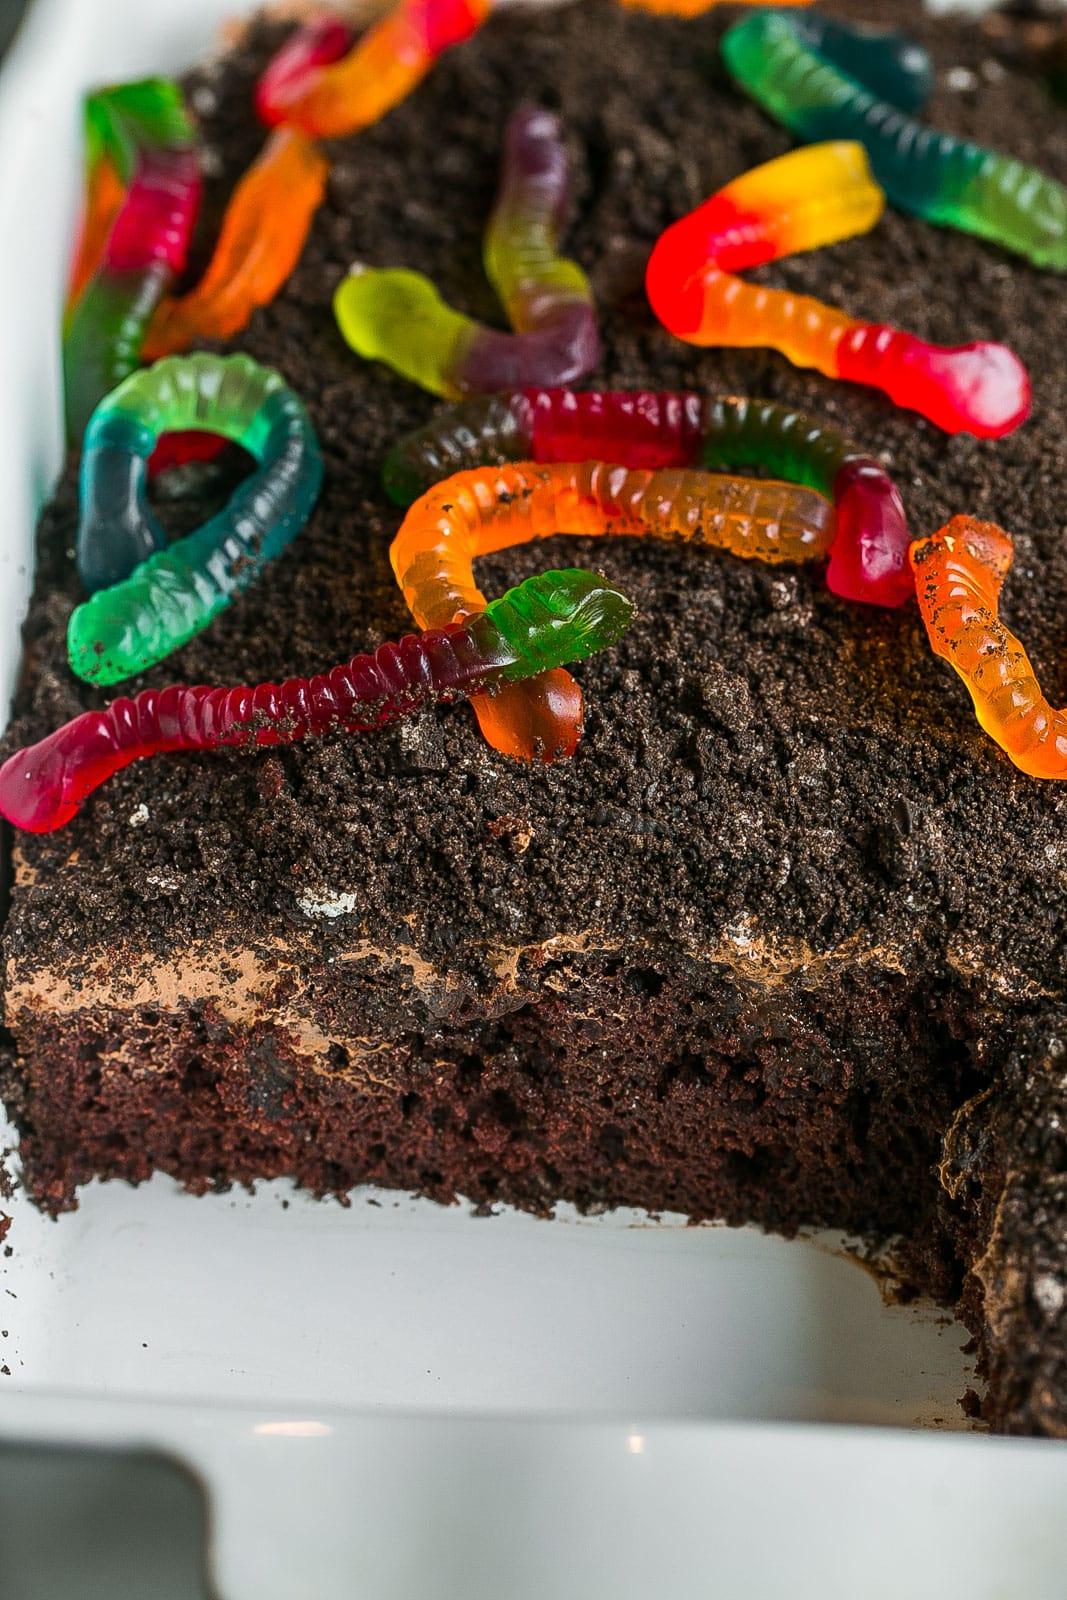 Inside view of a chocolate pudding Oreo cake with gummy worms.